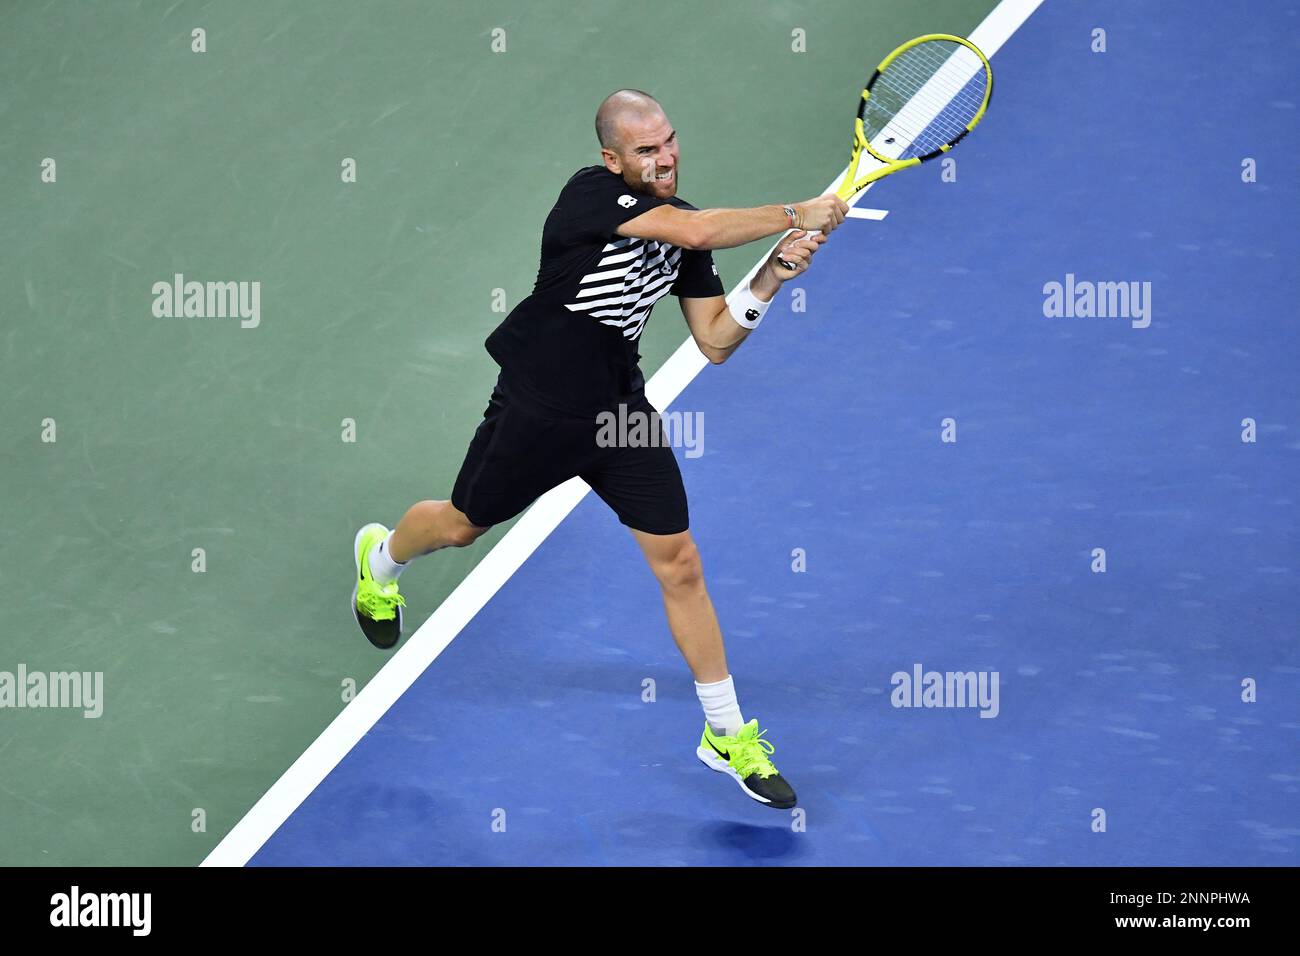 Adrian Mannarino in action against Alexander Zverev during a mens singles match at the 2020 US Open, Friday, Sept